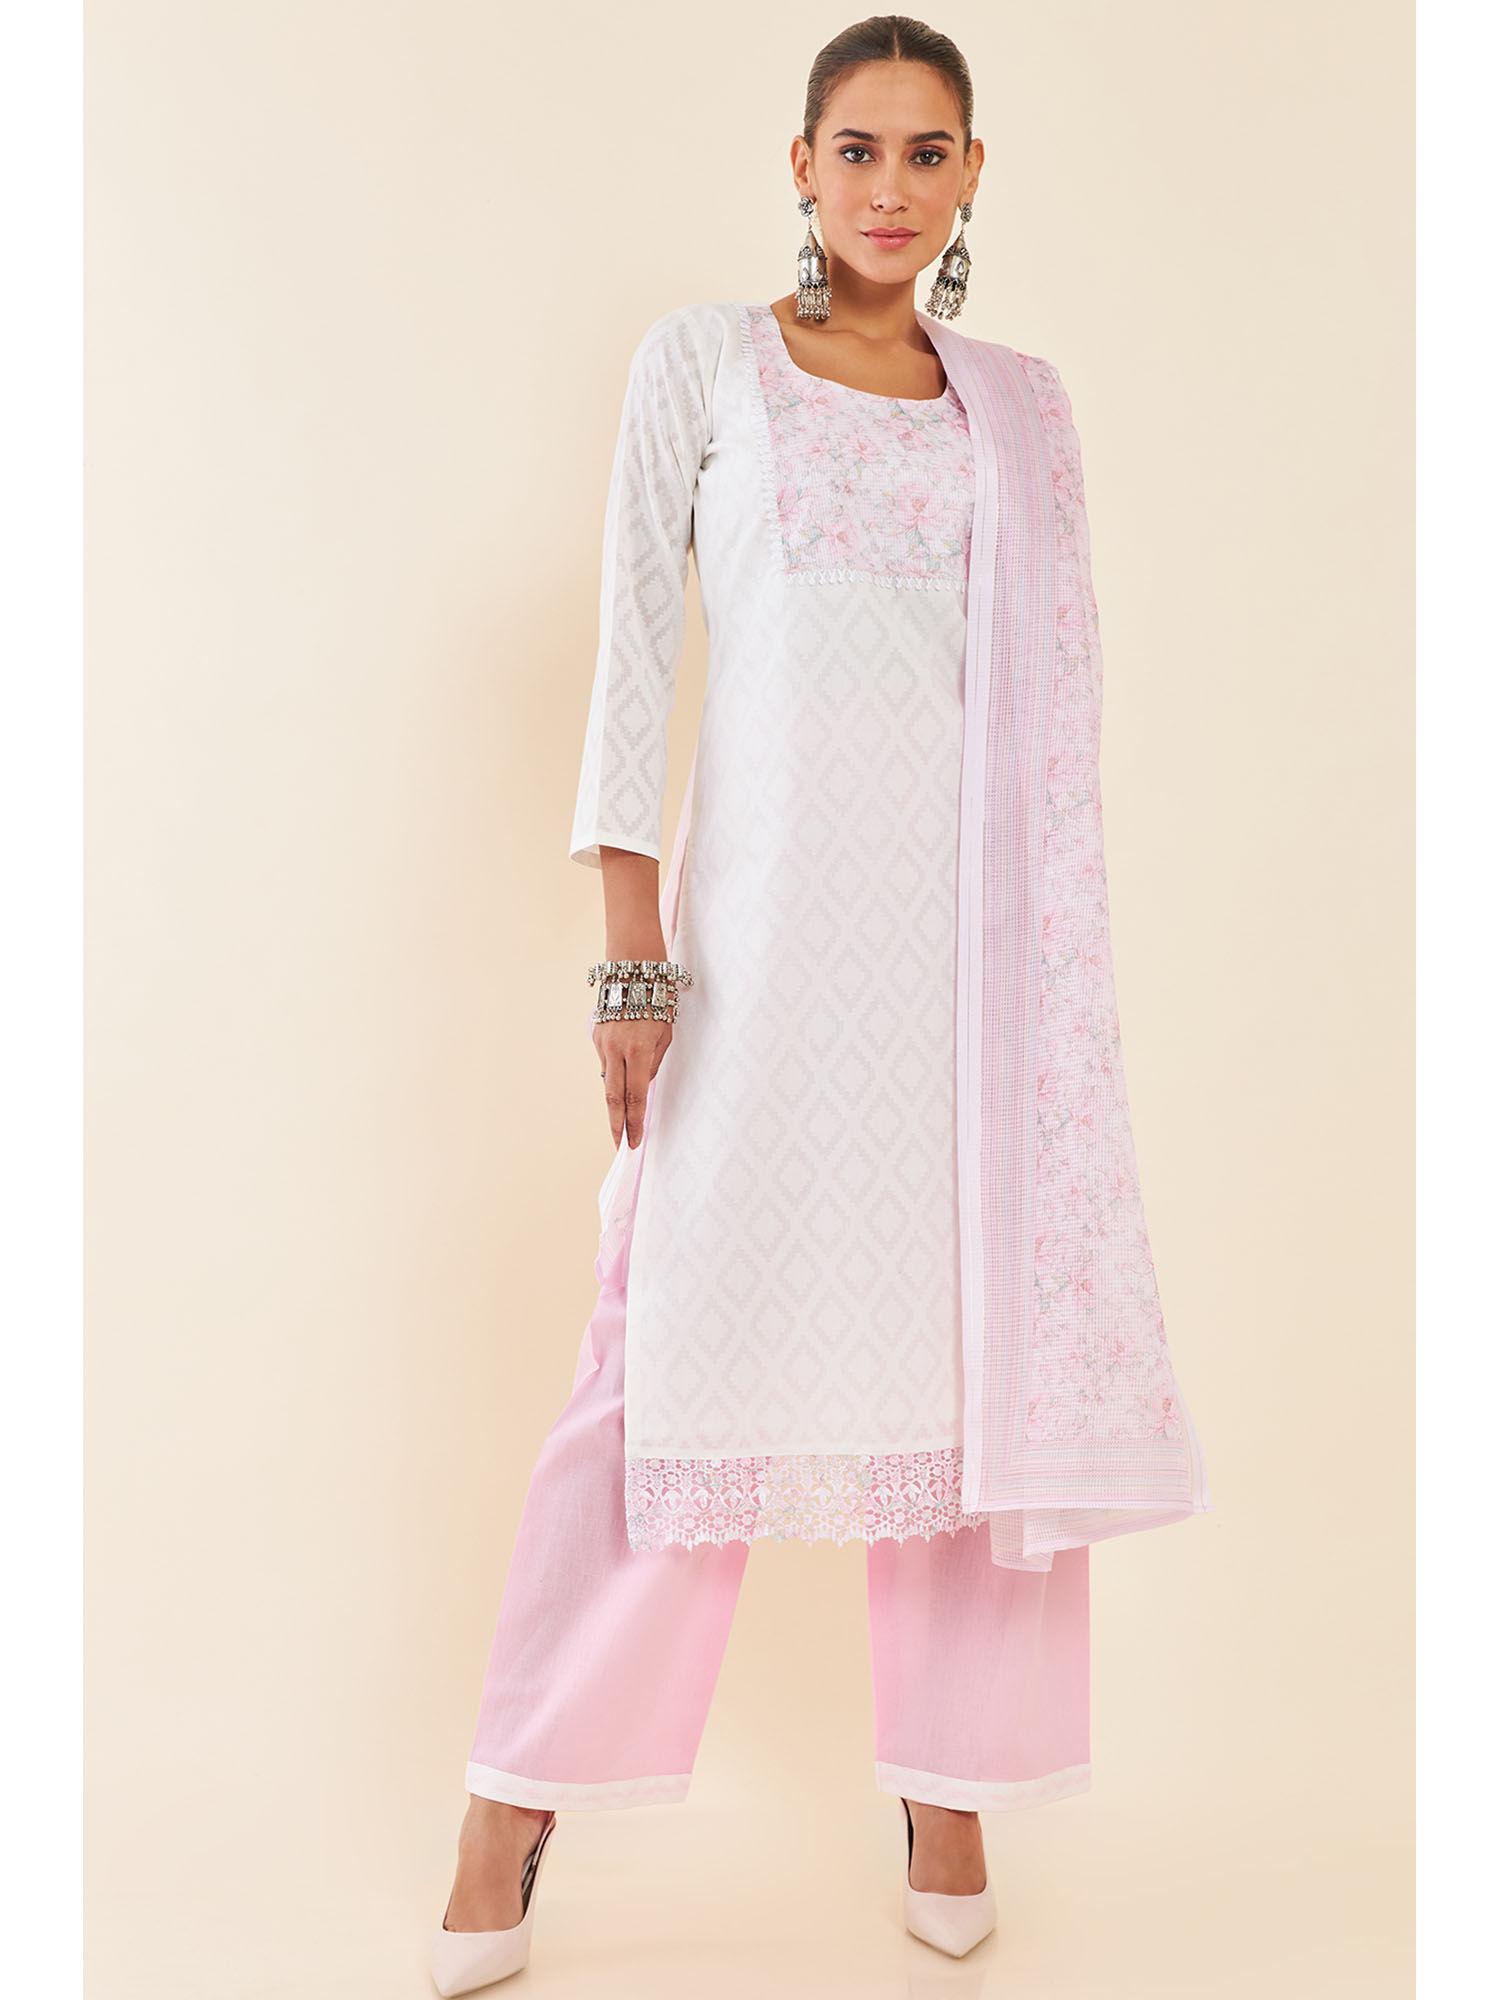 white-self-woven-cotton-unstitched-dress-material-with-pink-floral-dupatta-(set-of-3)